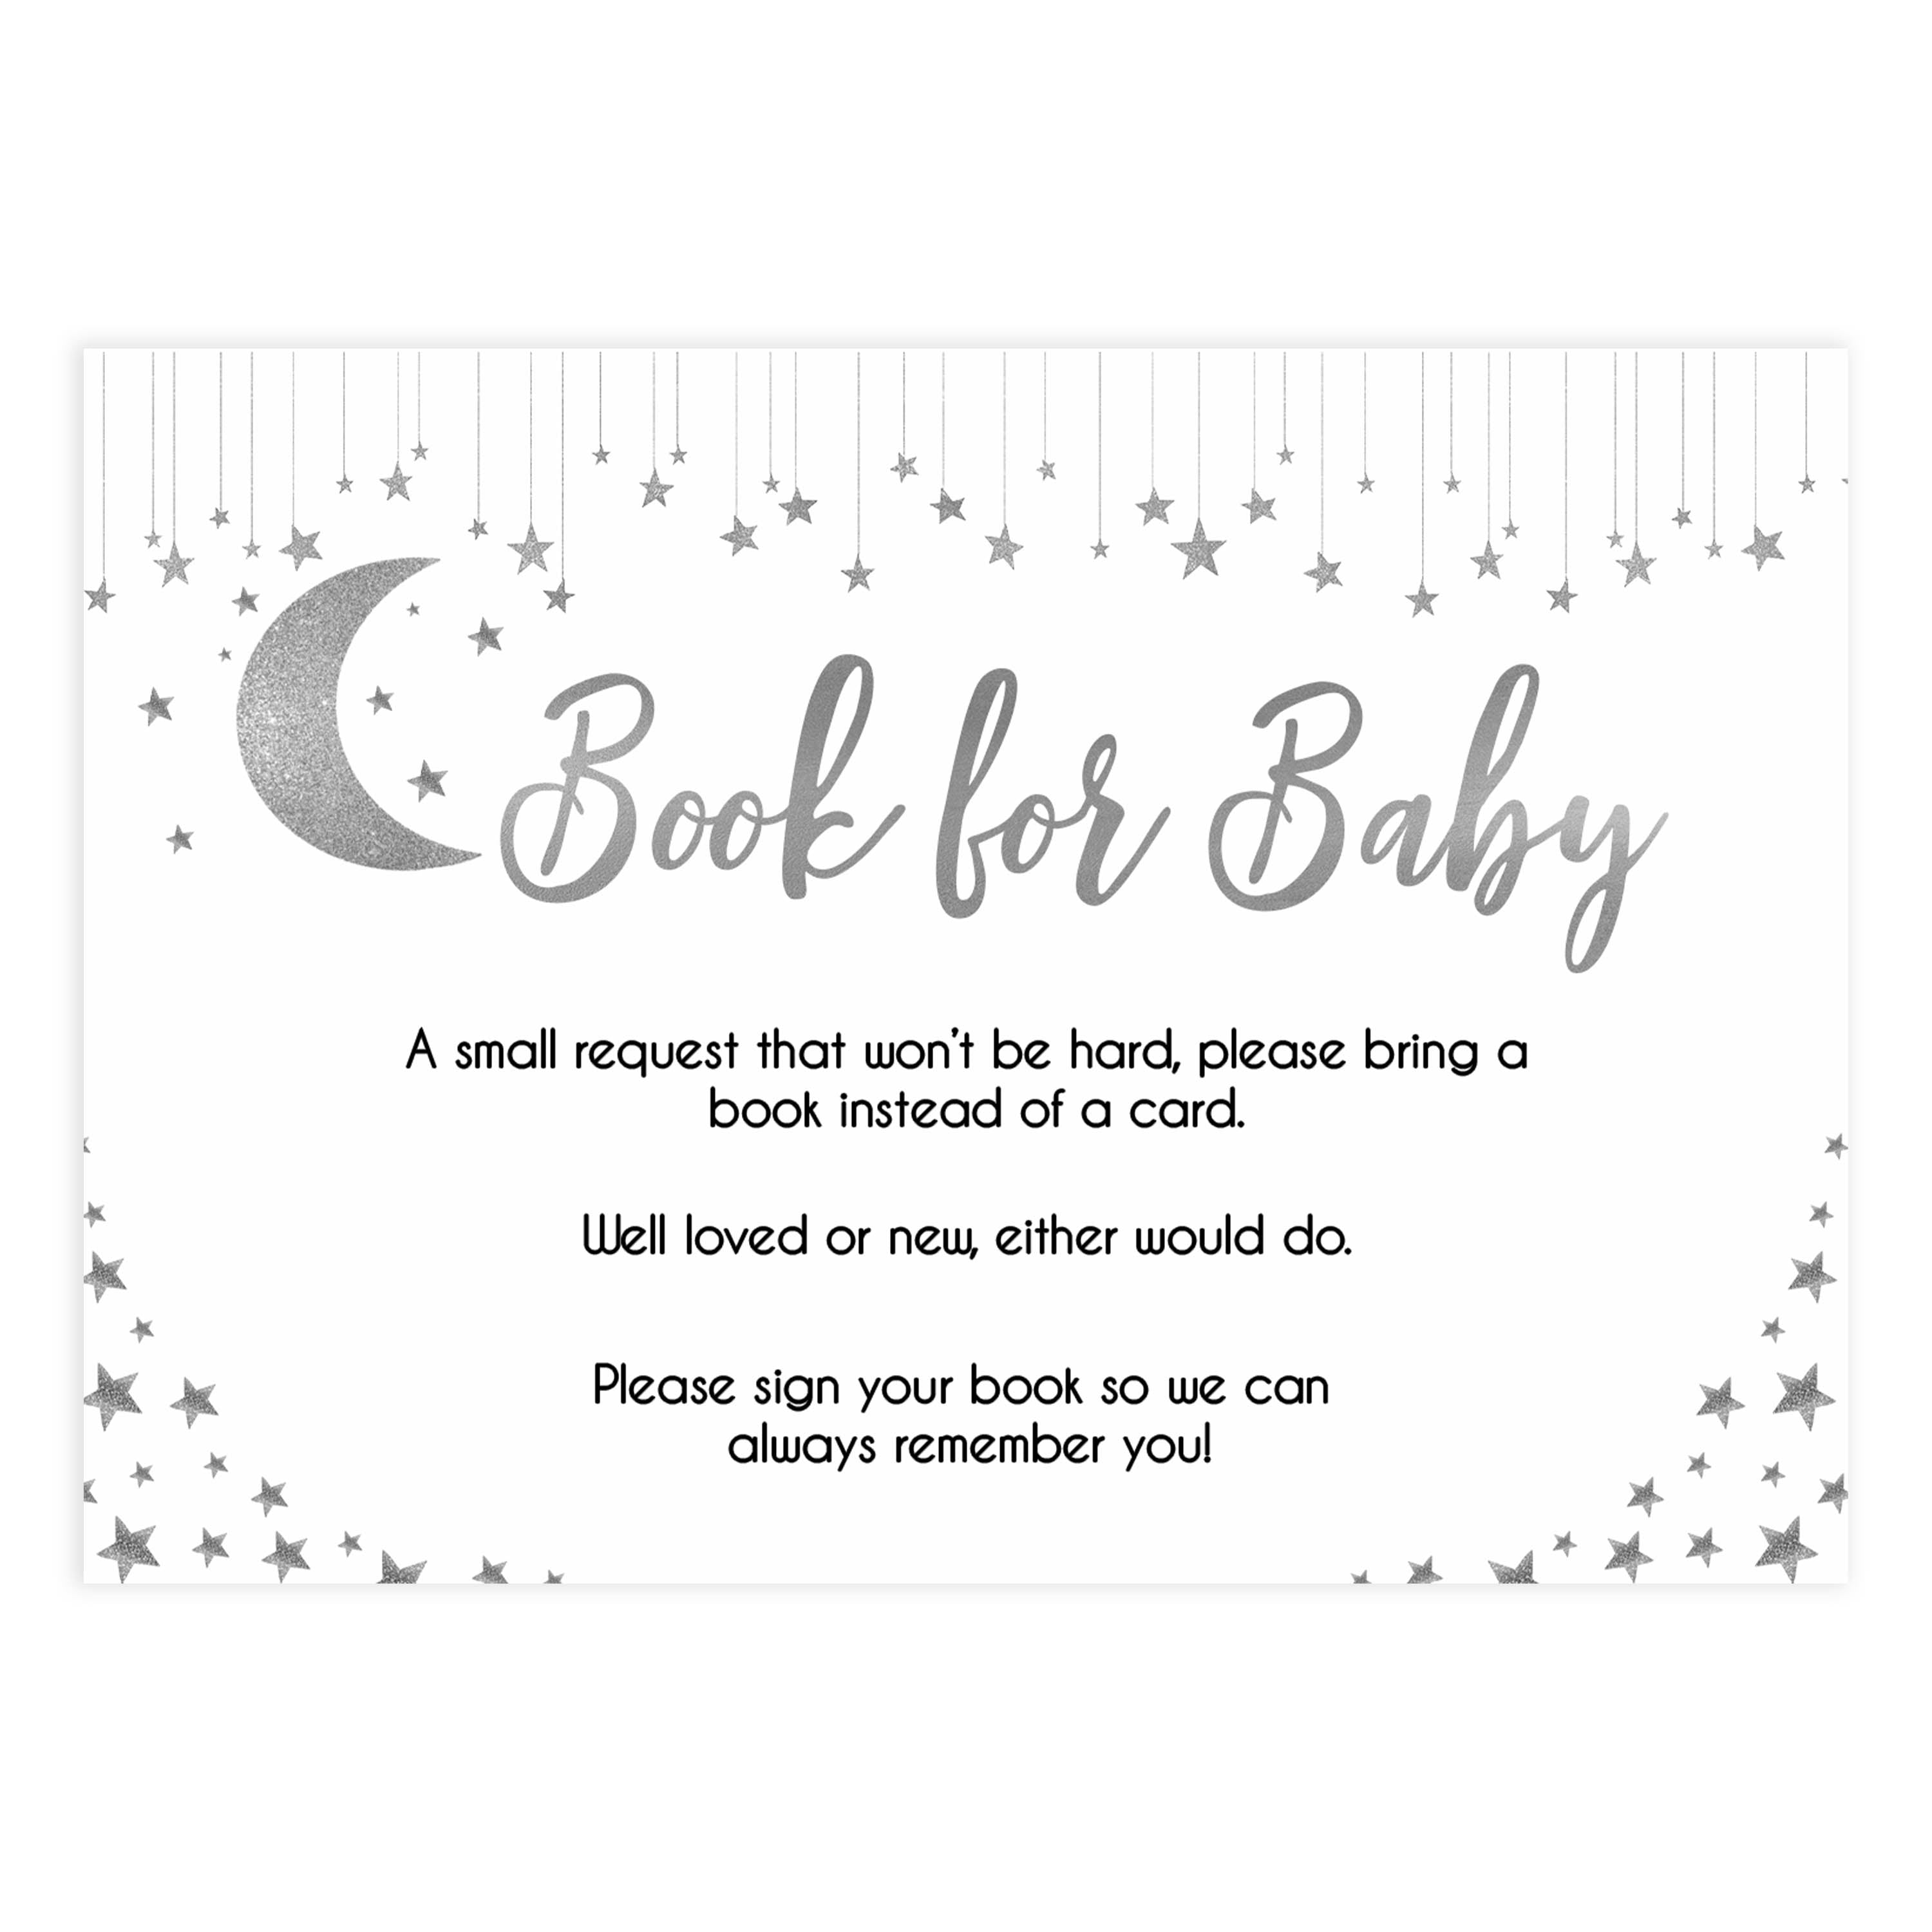 Books for baby, bring a book baby insert, Little star baby shower games, printable baby shower games, twinkle star baby shower, fun baby games, top baby shower ideas